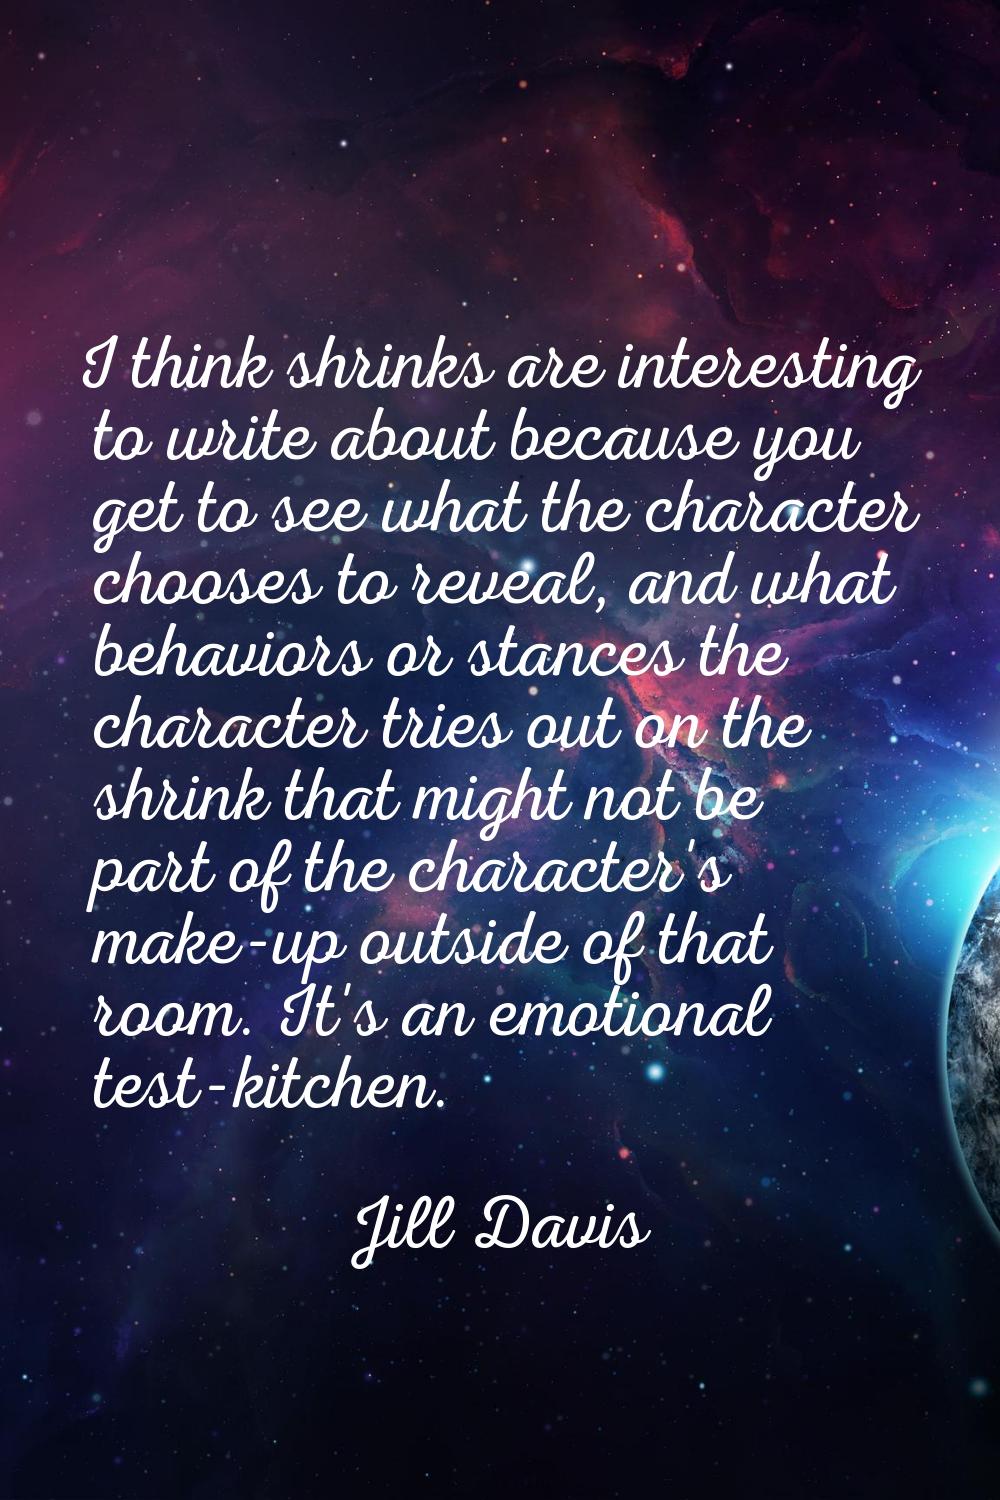 I think shrinks are interesting to write about because you get to see what the character chooses to